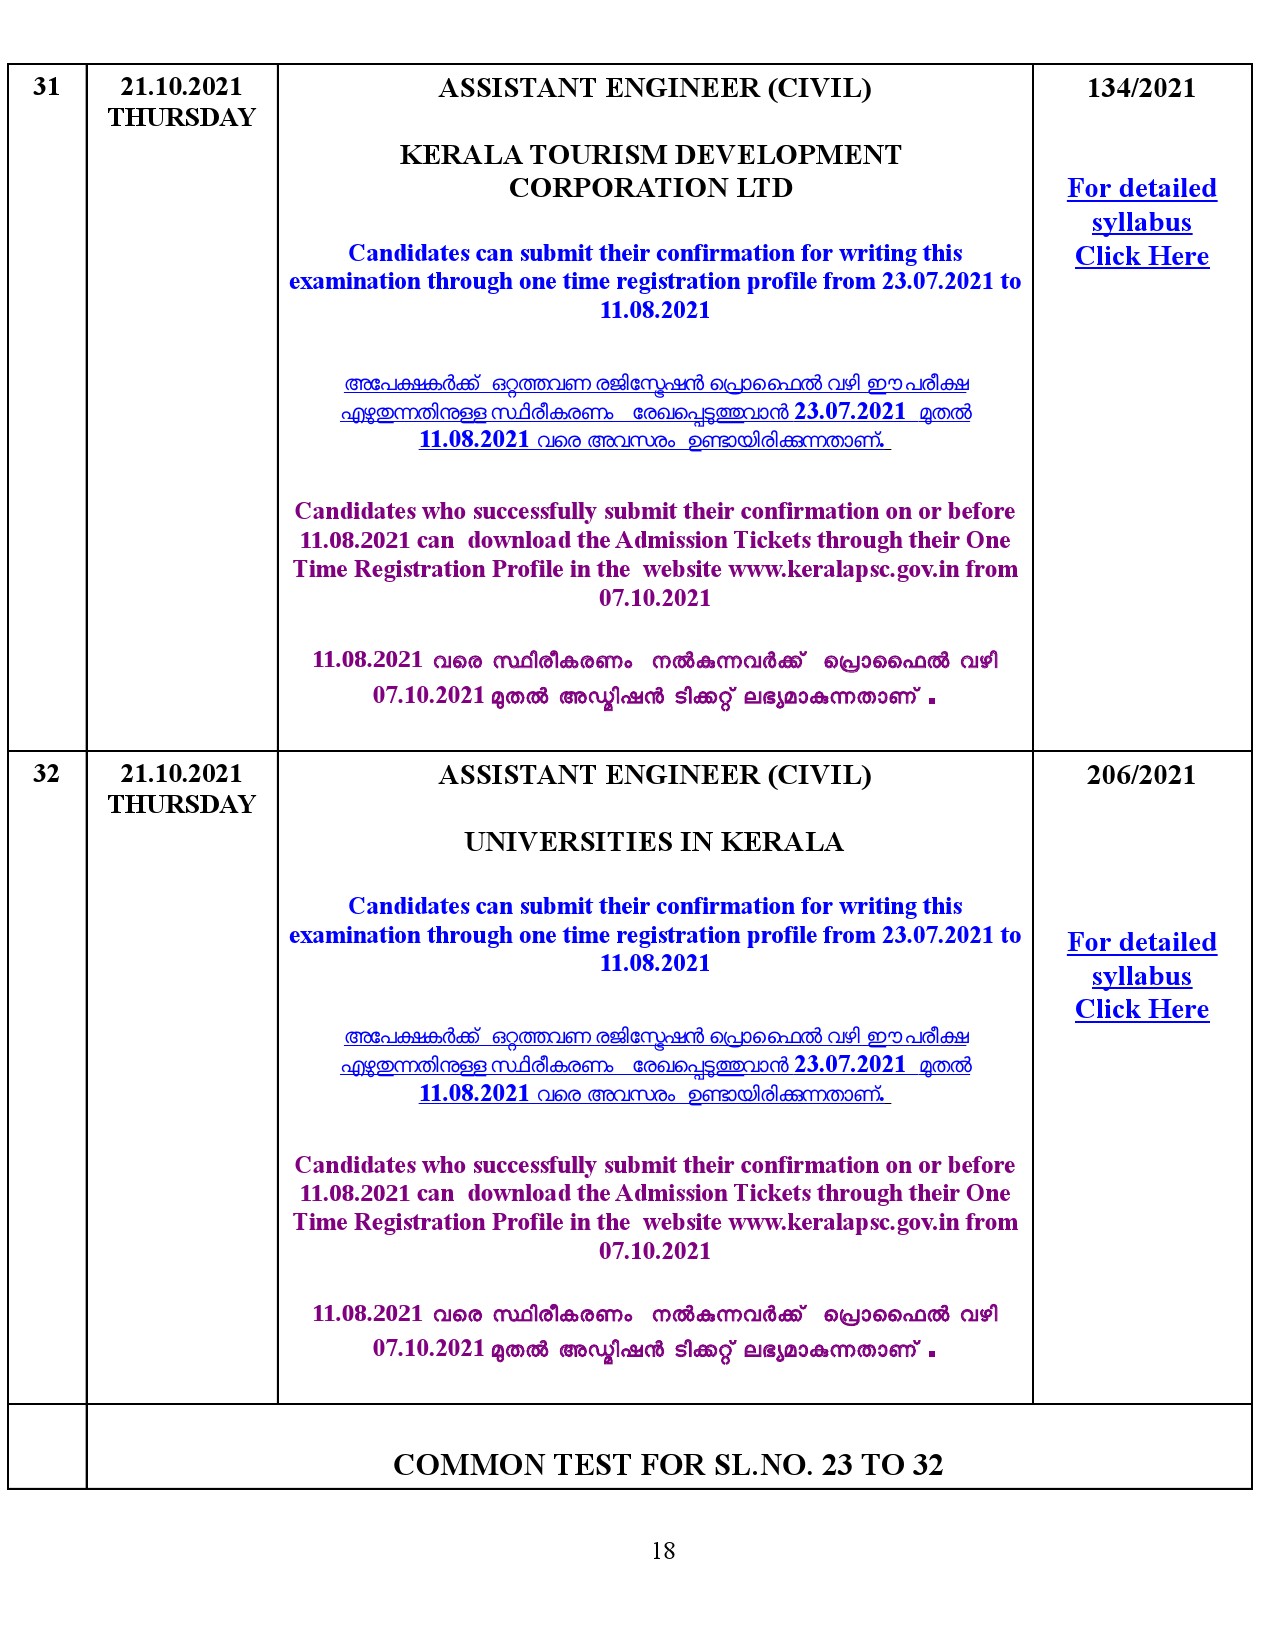 KPSC Examination Programme For The Month Of October 2021 - Notification Image 18